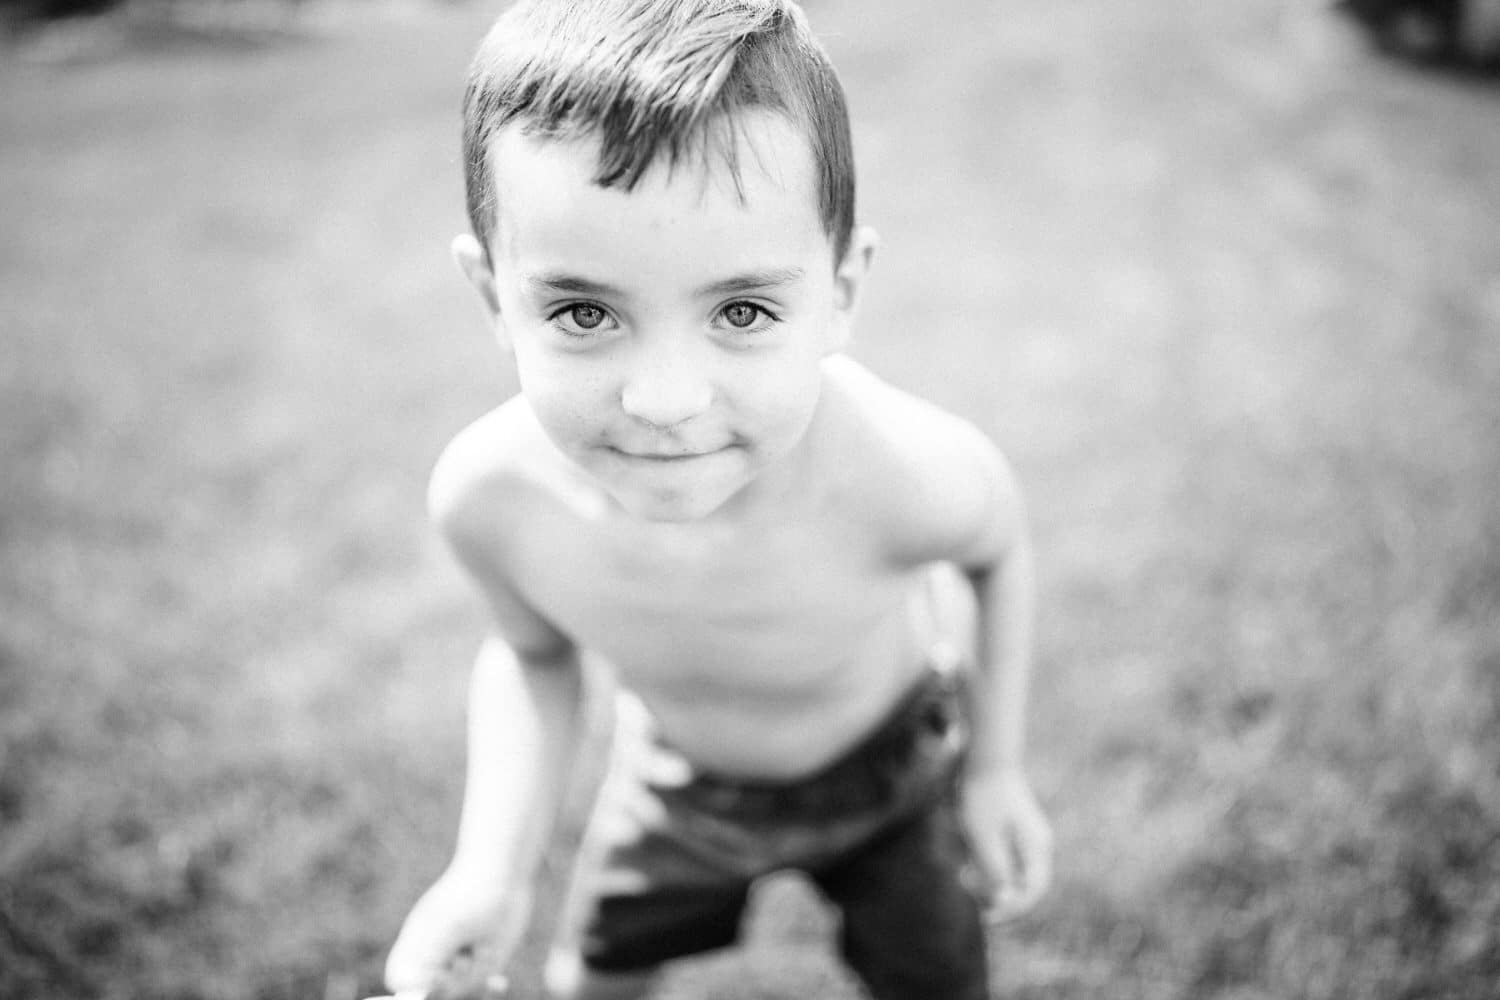 boy playing in his backyard and looked up to the camera for a photograph to be taken